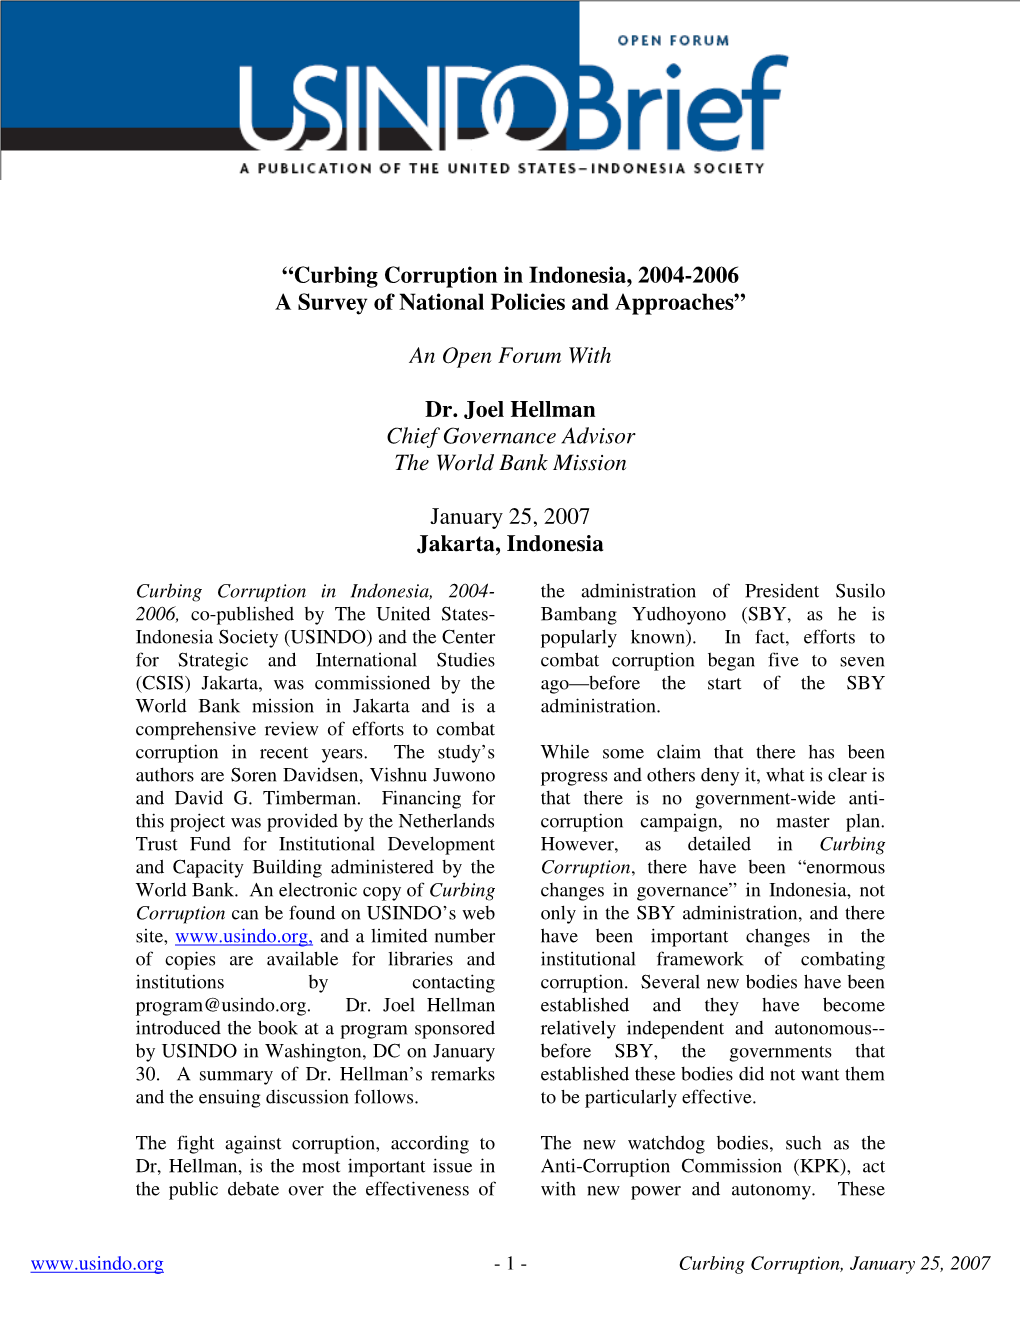 Curbing Corruption in Indonesia, 2004-2006 a Survey of National Policies and Approaches”